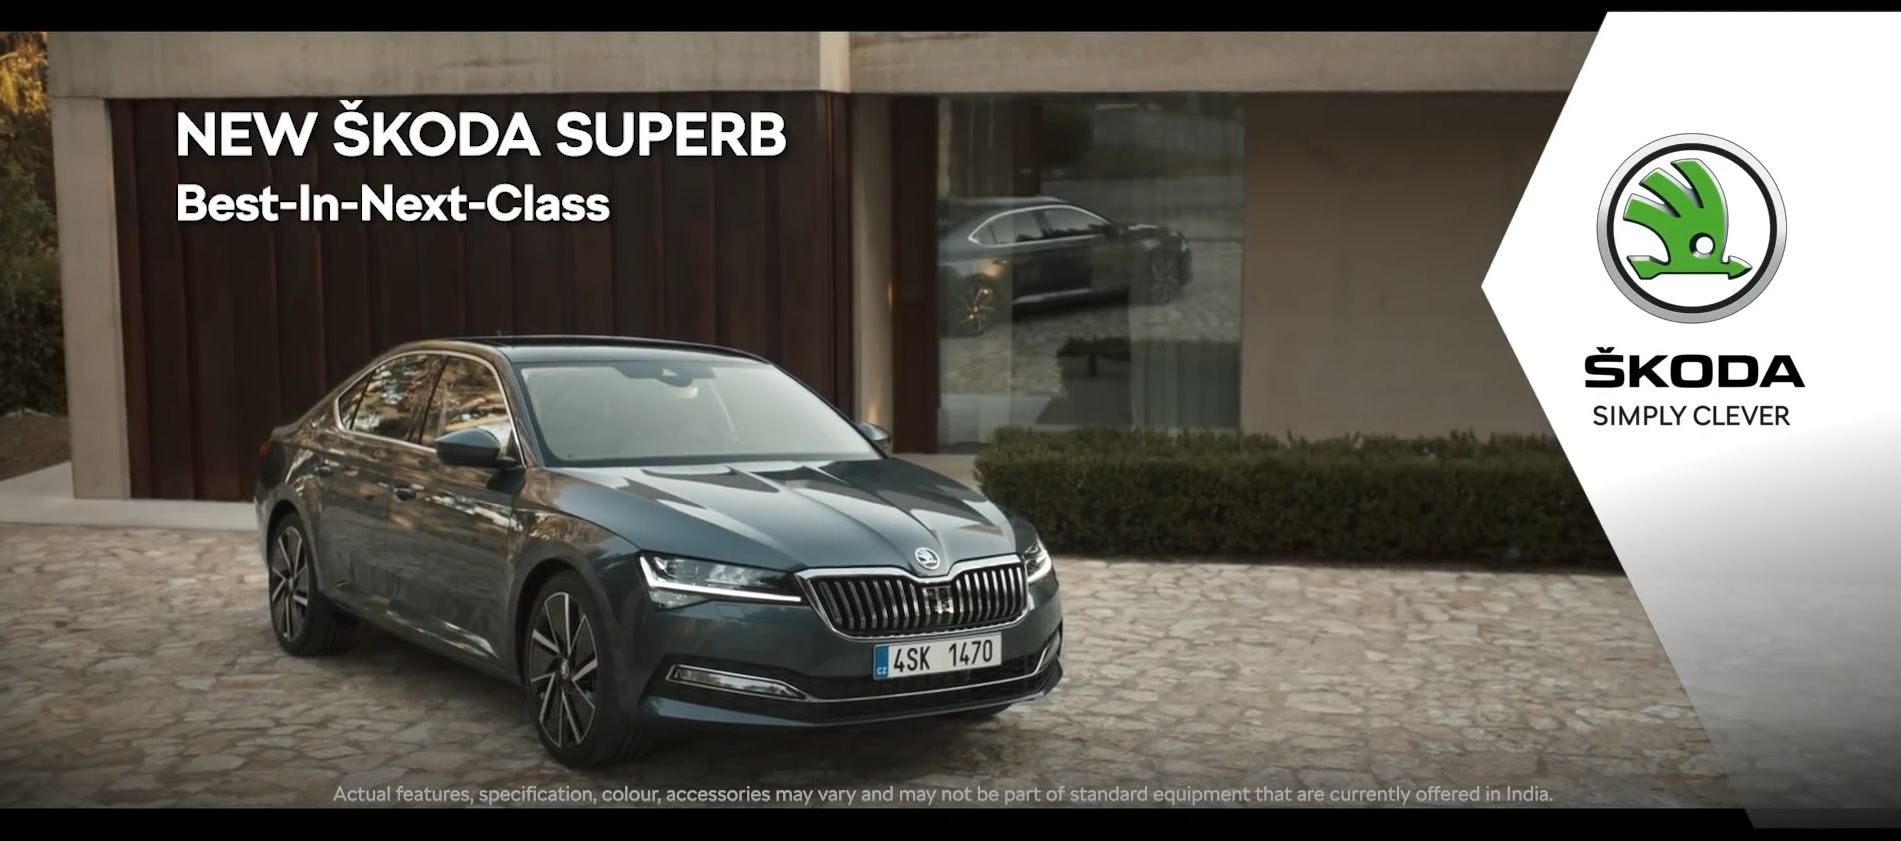 PPS Skoda Superb Feature Experience